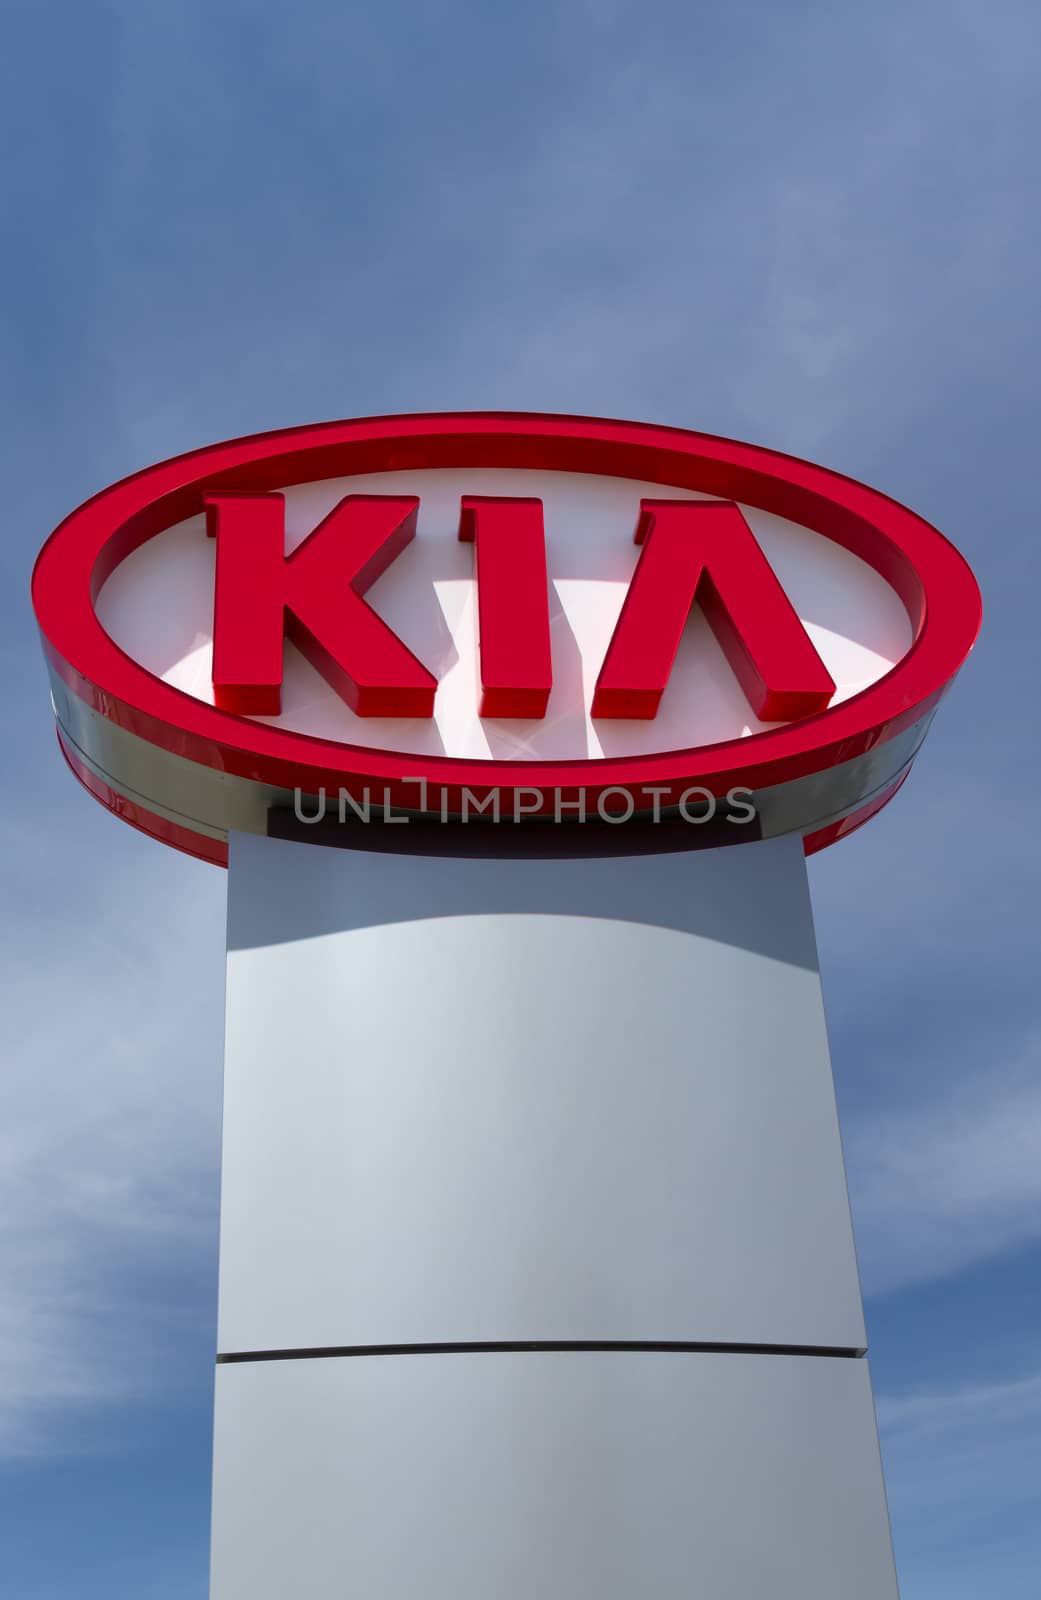 Kia Autombile Dealership Sign by wolterk